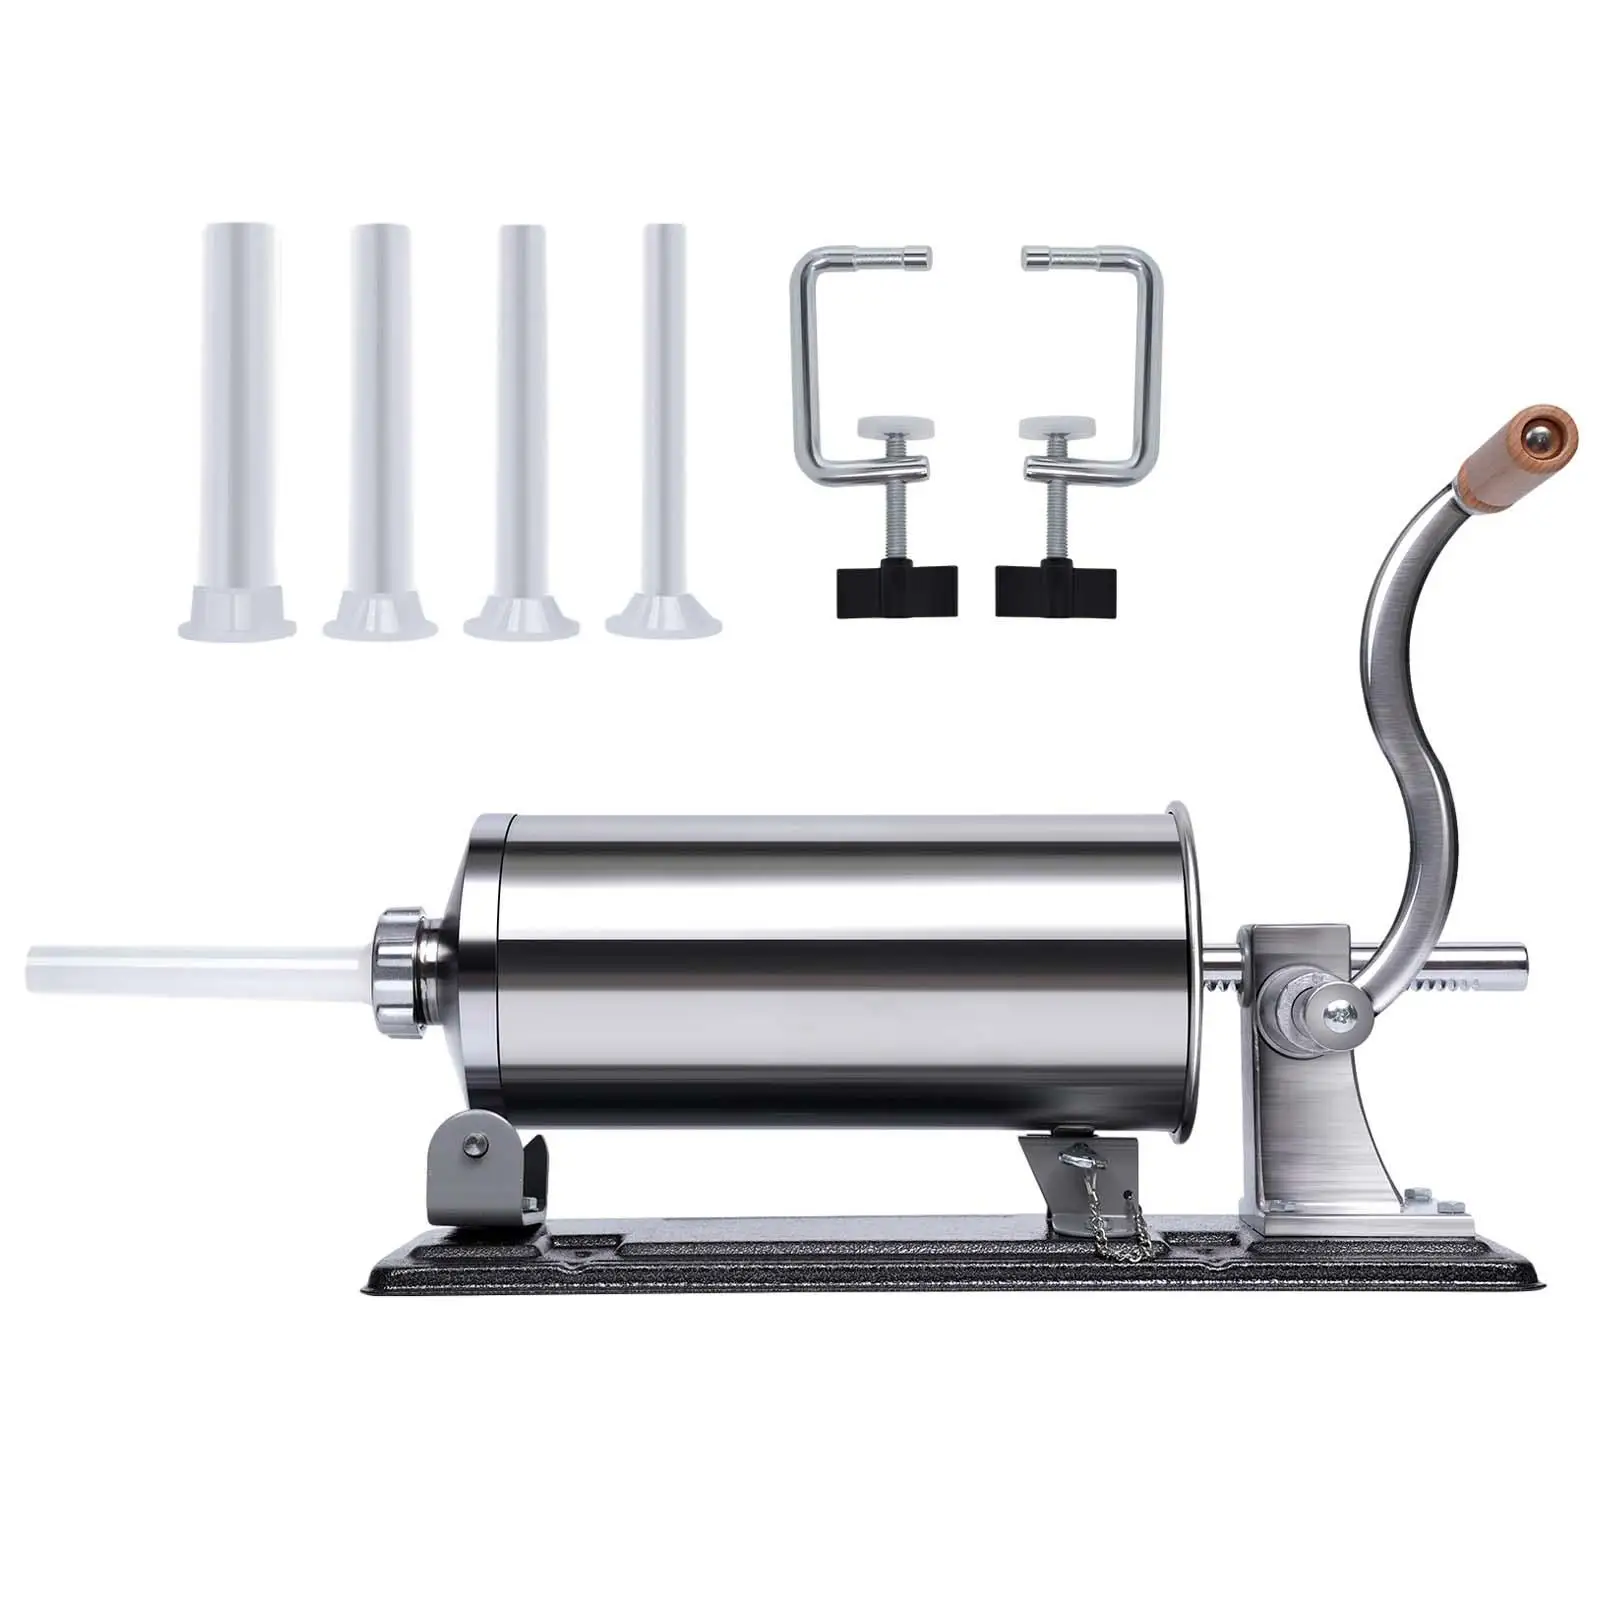 Homemade Sausage Machine with 4 Size Professional Filling Nozzles Attachment Sausage Stuffer for Kitchen Sausage Household Meat